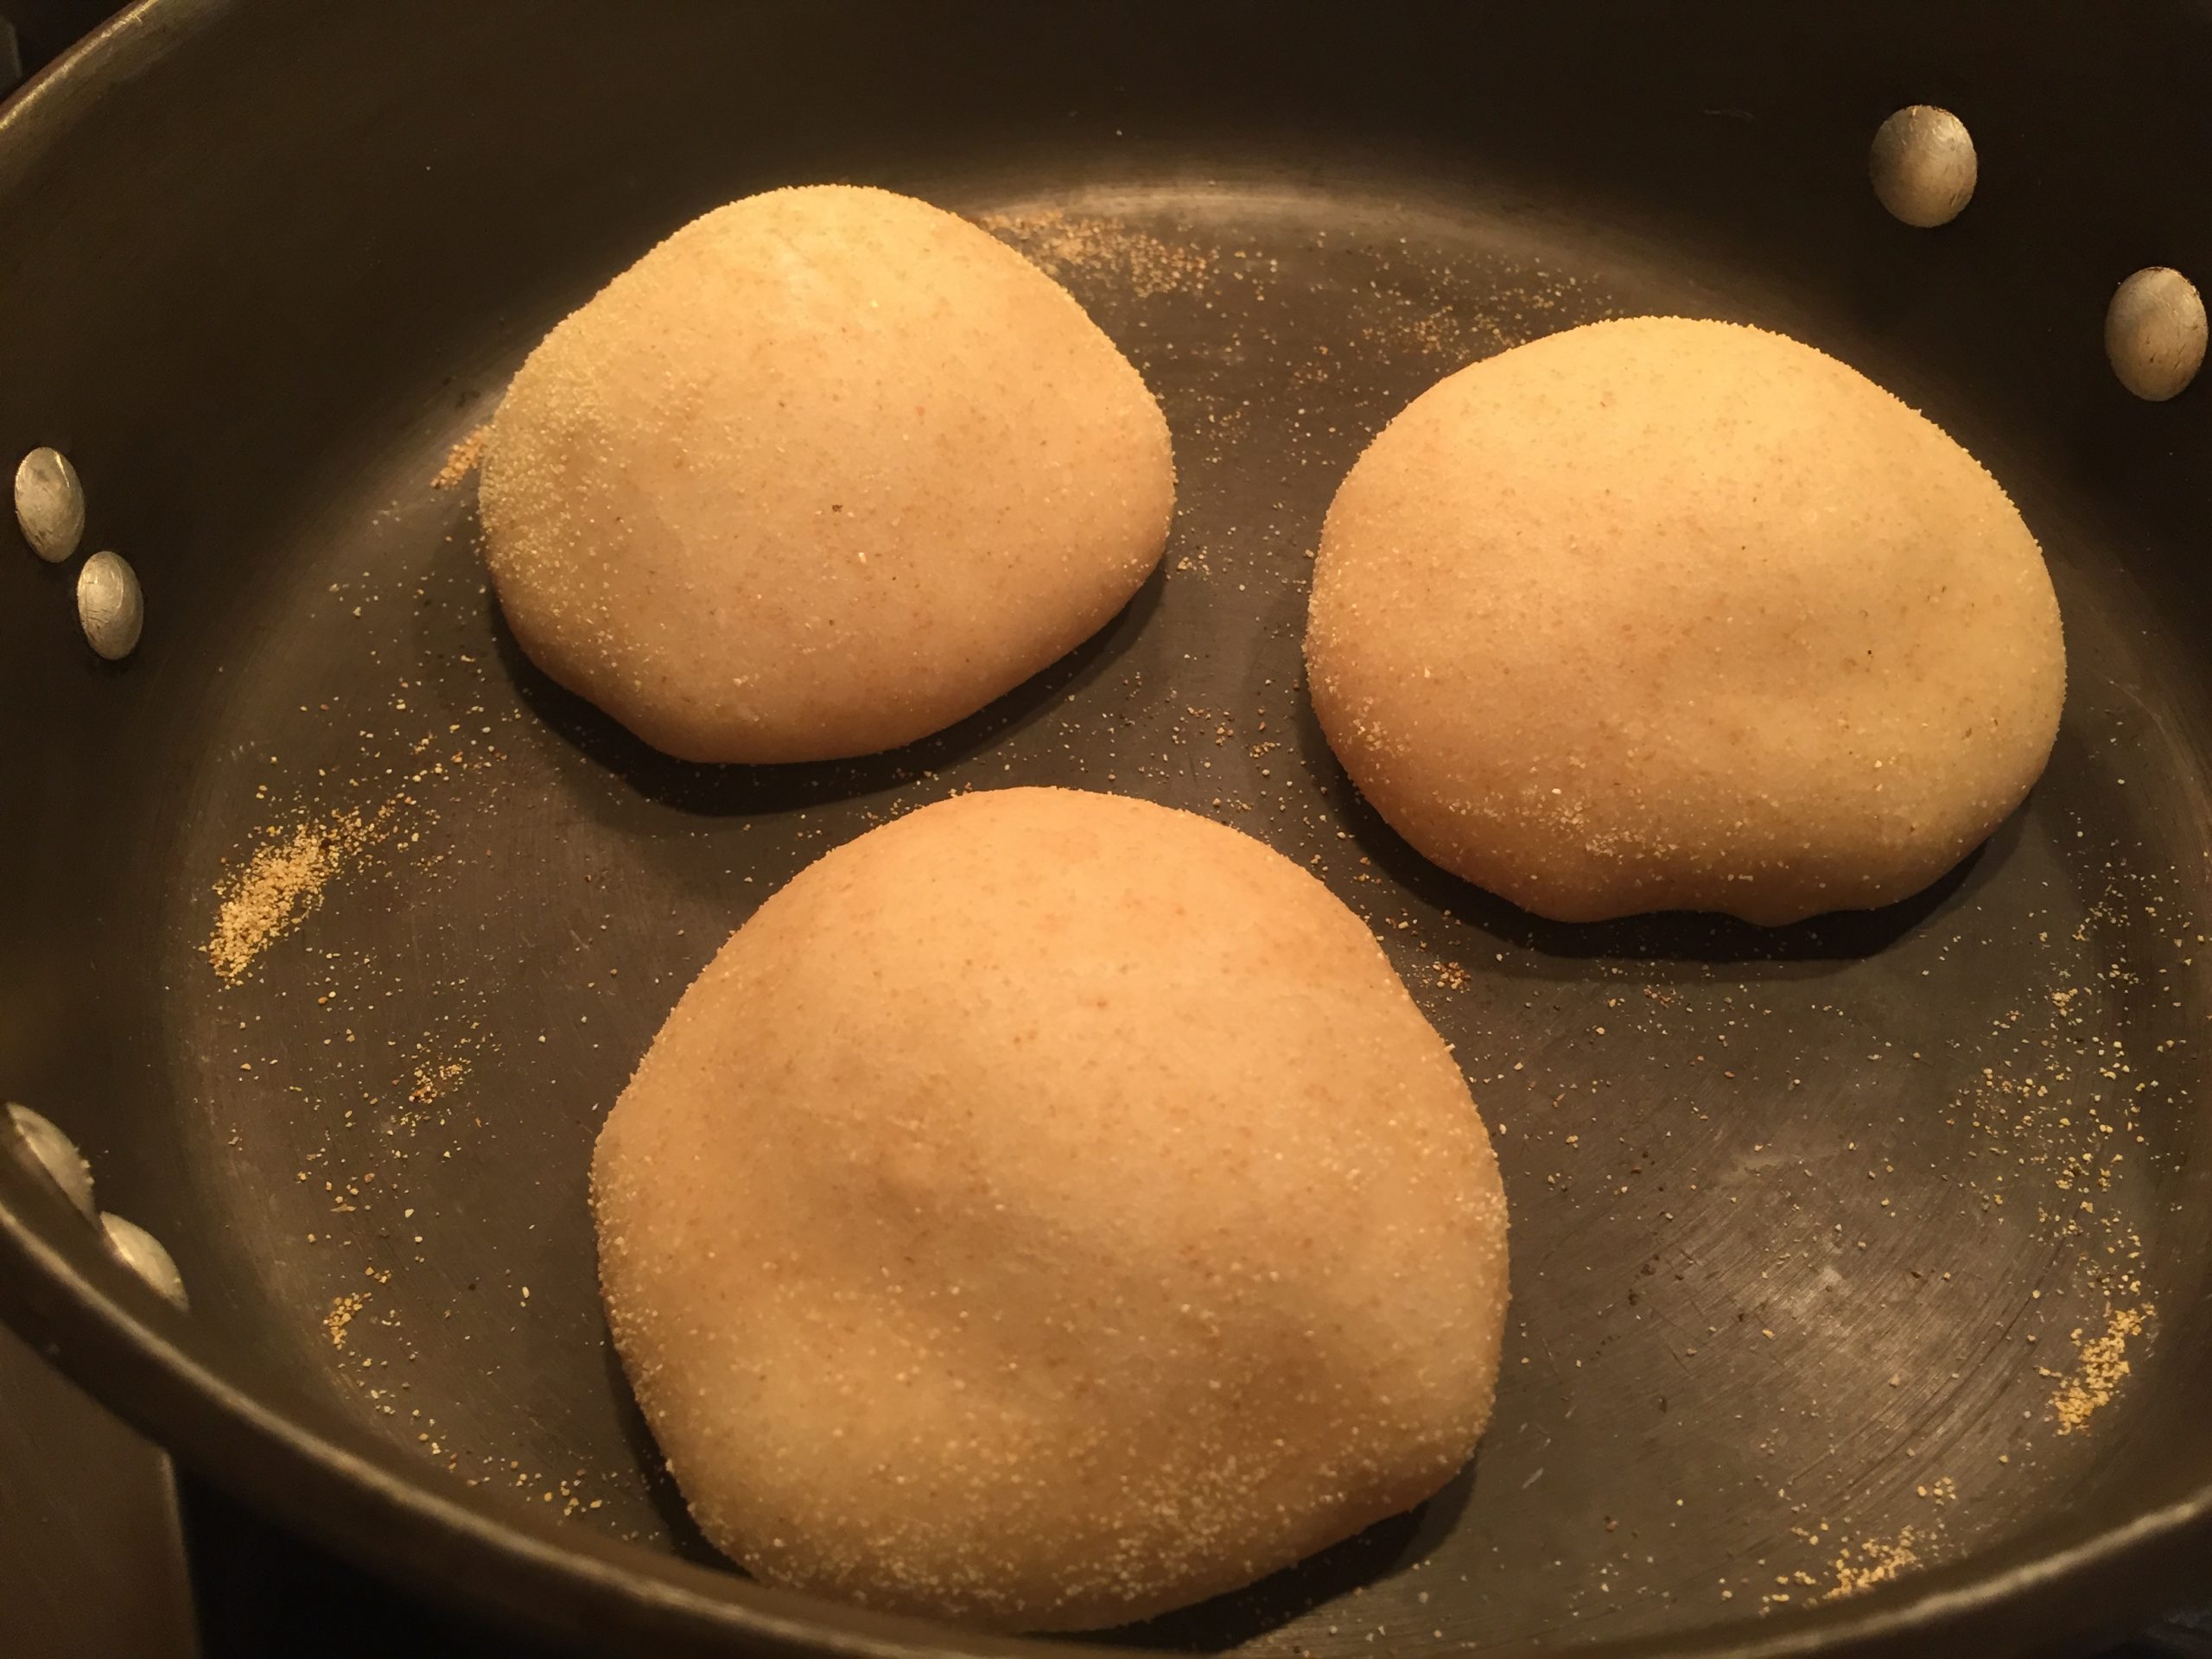 English muffins rise after 4 minutes